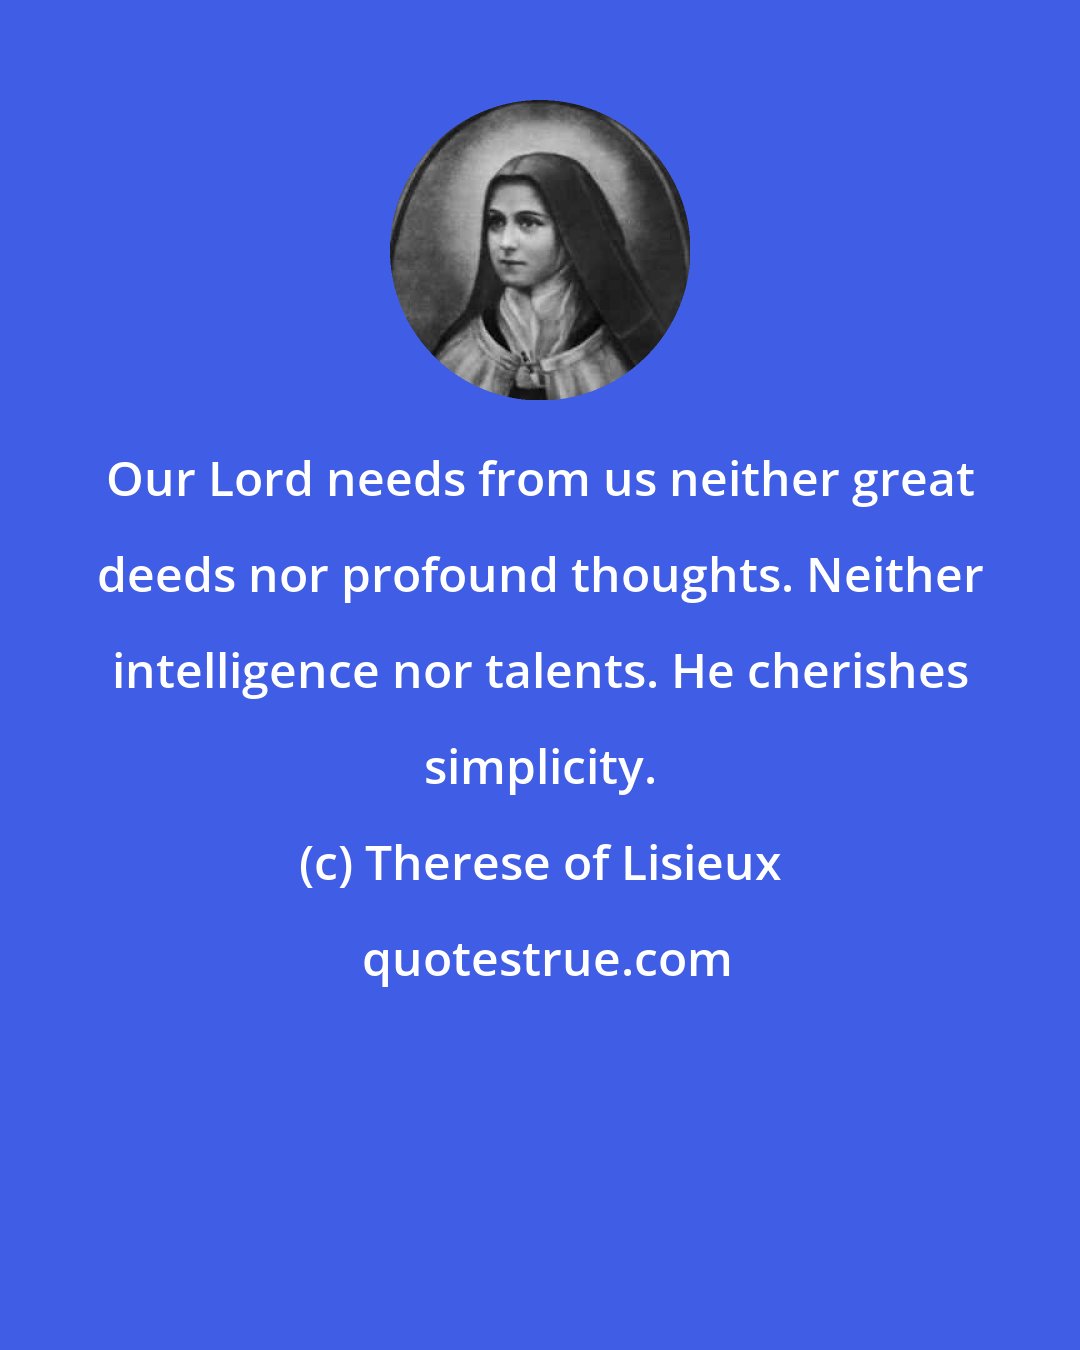 Therese of Lisieux: Our Lord needs from us neither great deeds nor profound thoughts. Neither intelligence nor talents. He cherishes simplicity.